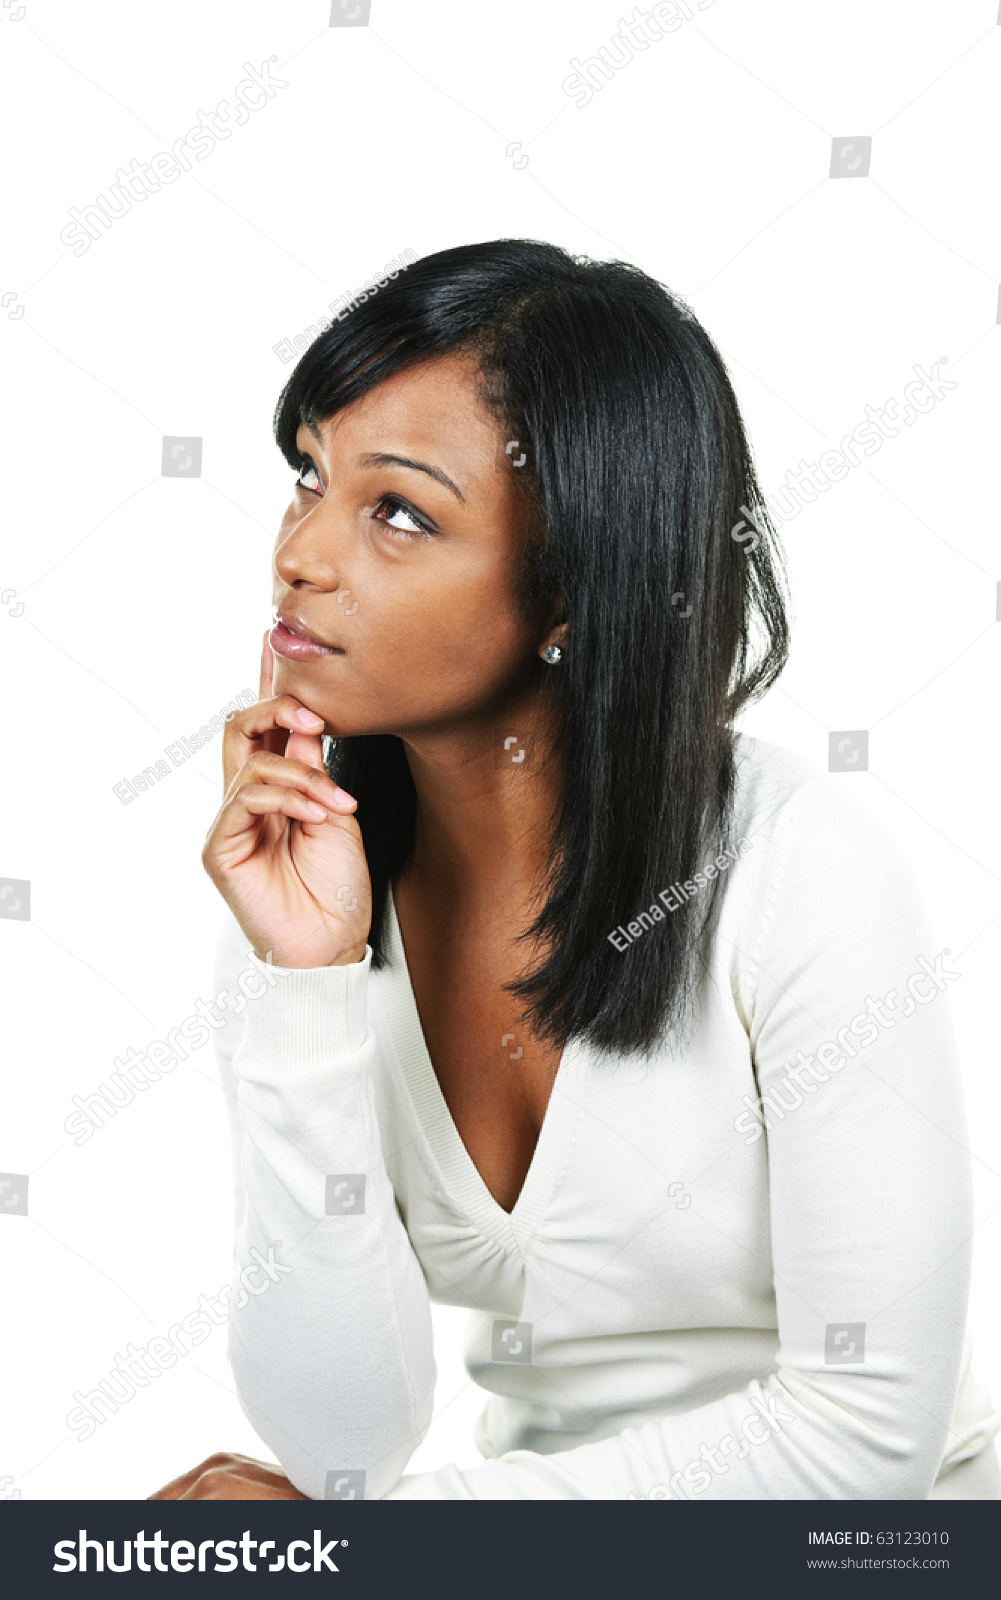 Thoughtful Black Woman Looking Up Portrait Isolated On White Background